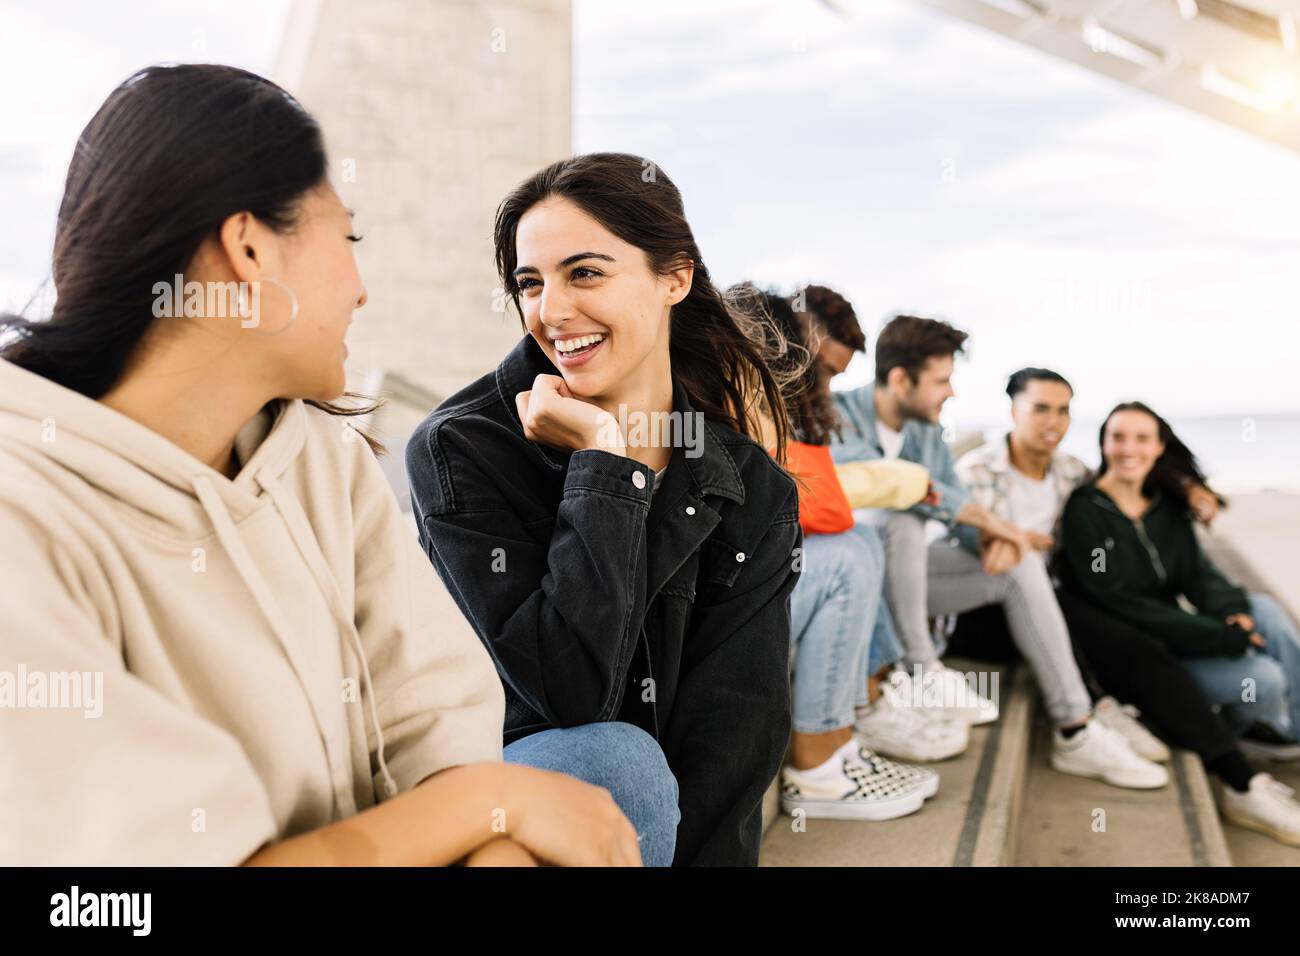 Happy young group of multiracial friends hanging out together outdoors Stock Photo